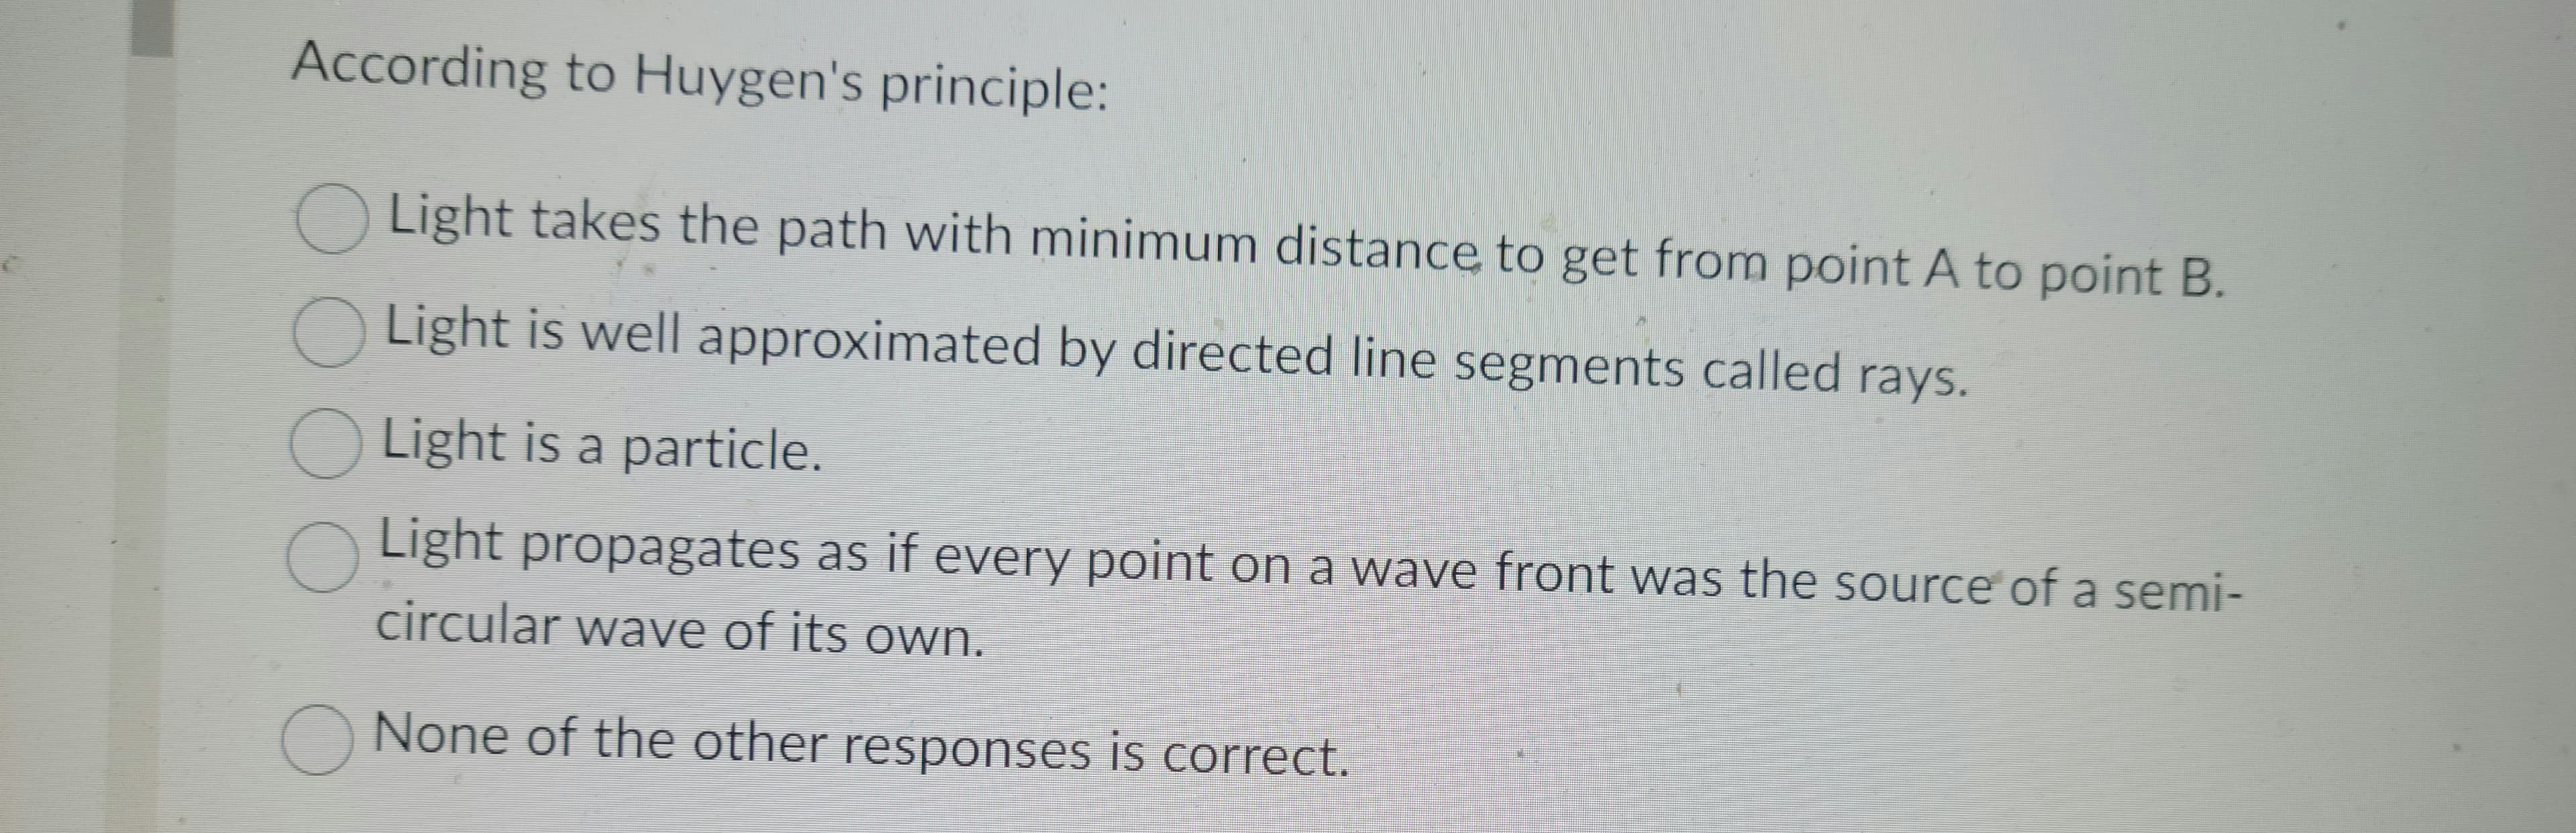 According to Huygen's principle:
Light takes the path with minimum distance to get from point A to point B.
Light is well approximated by directed line segments called rays.
Light is a particle.
Light propagates as if every point on a wave front was the source of a semi-
circular wave of its own.
None of the other responses is correct.
0000